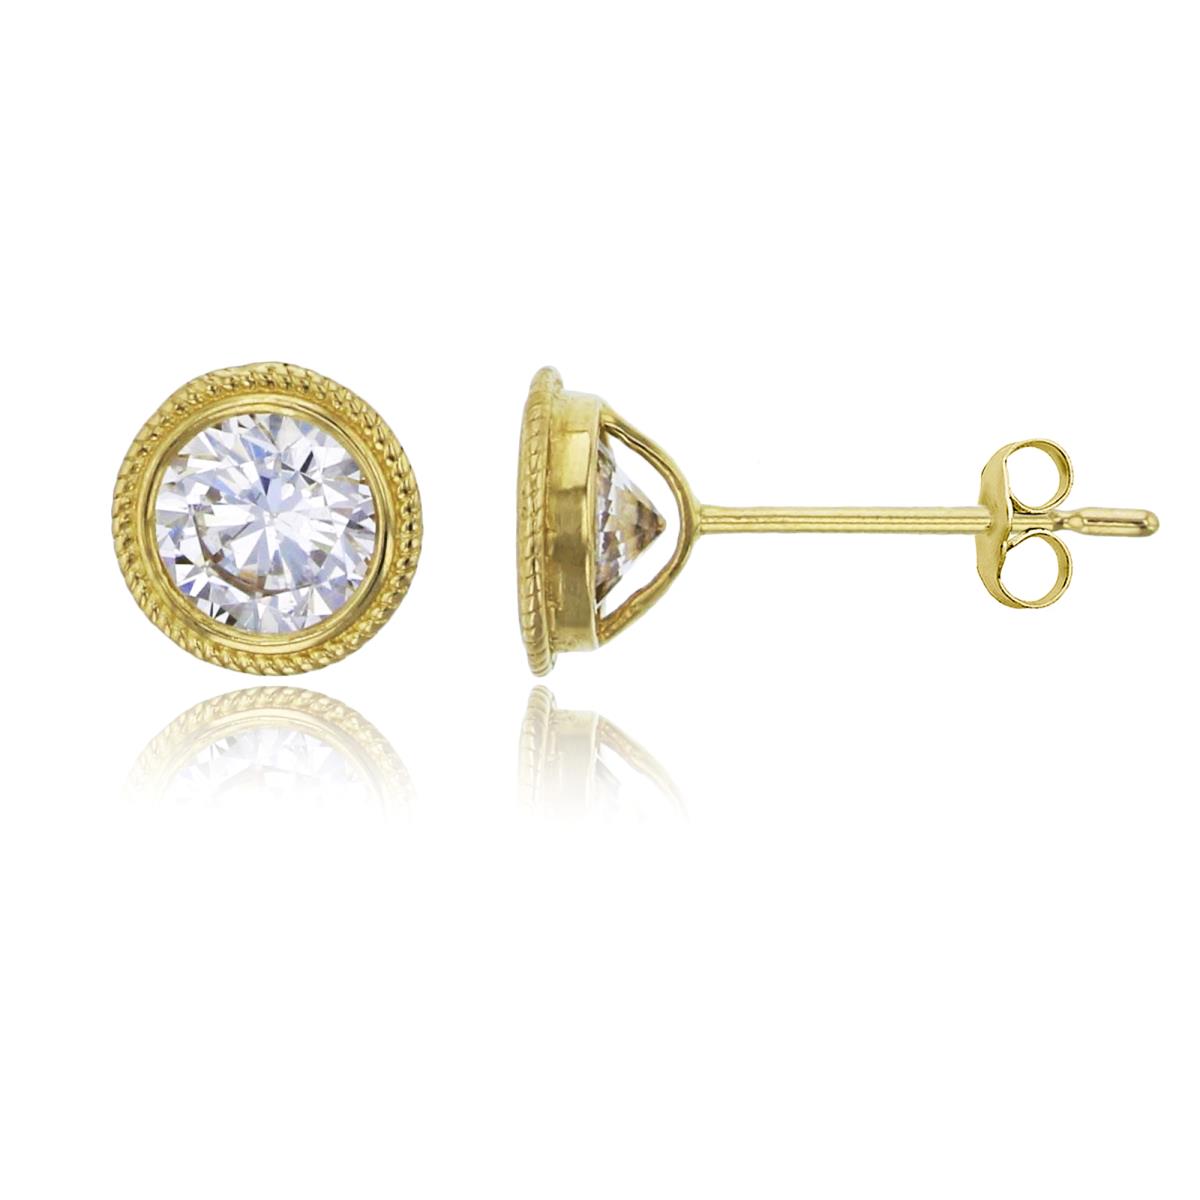 14K Yellow Gold 5mm Round Cut Milgrain Stud Earring with 14K Clutch